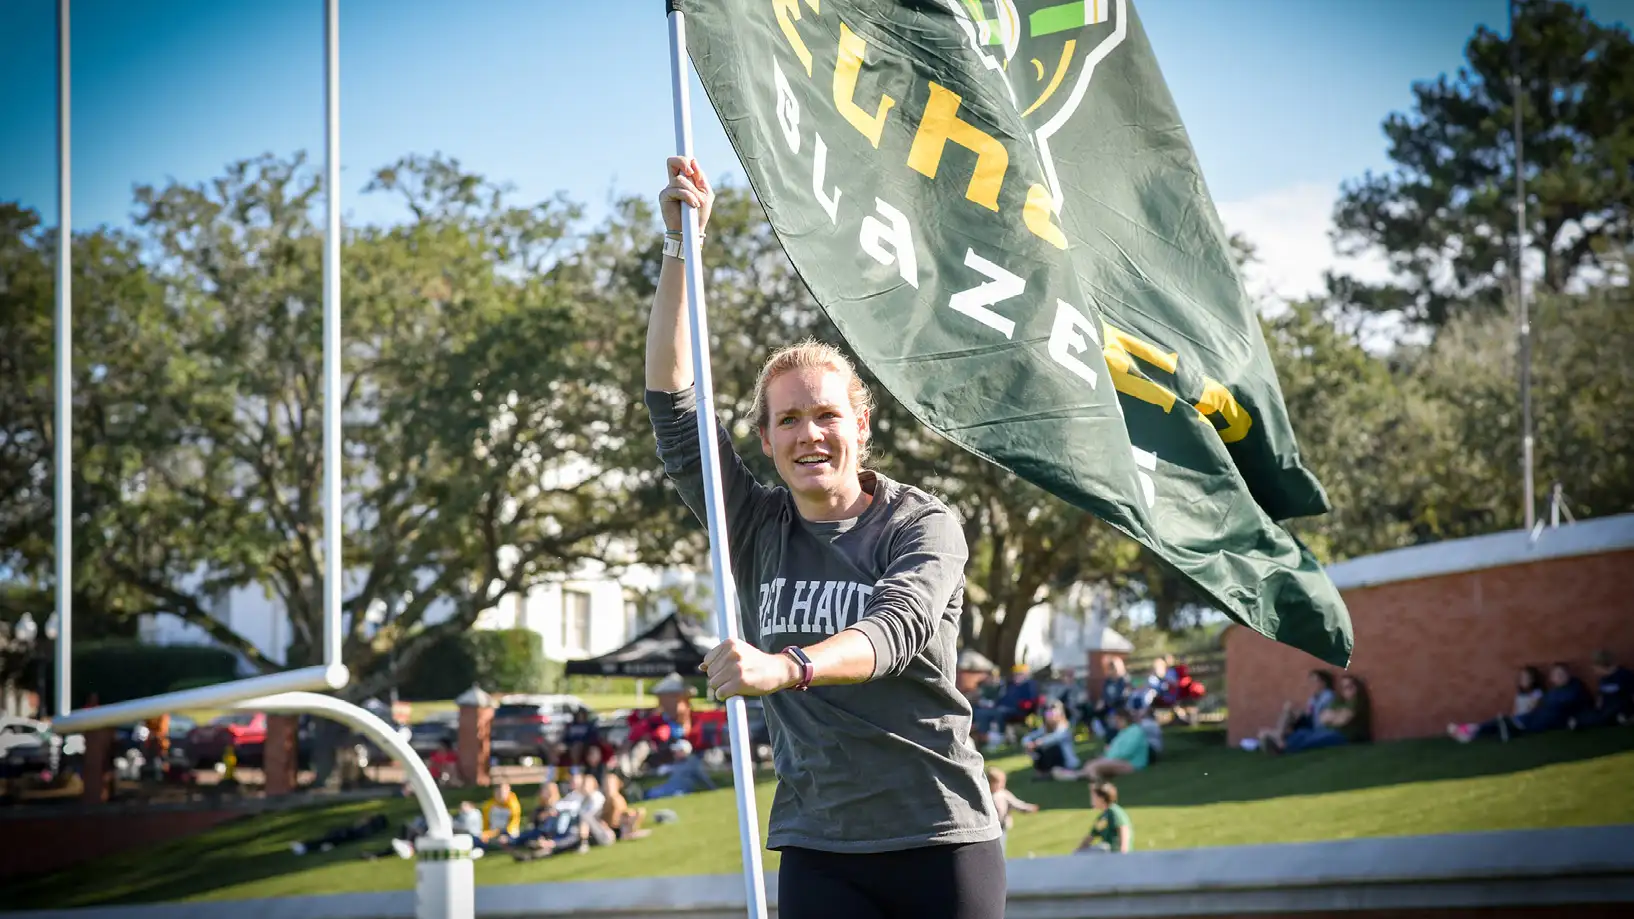 she carries the belhaven flag